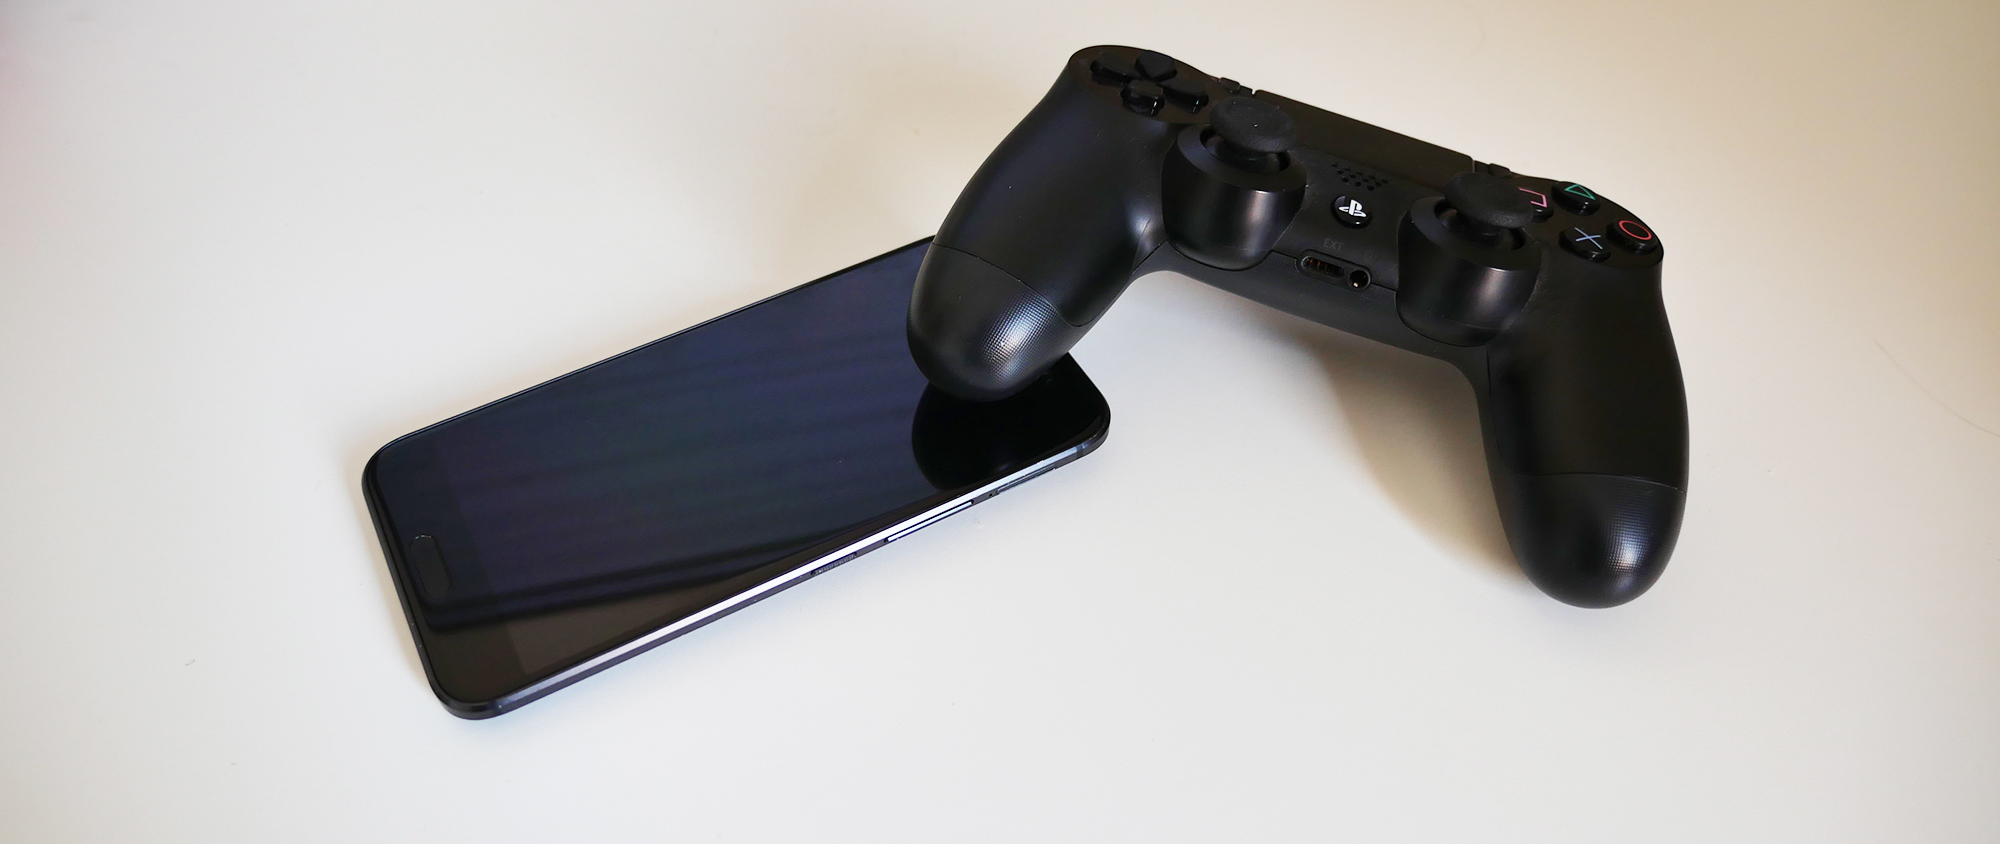 assimilation faktureres Erklæring How to stream media from an Android device to the PS4 – Phandroid